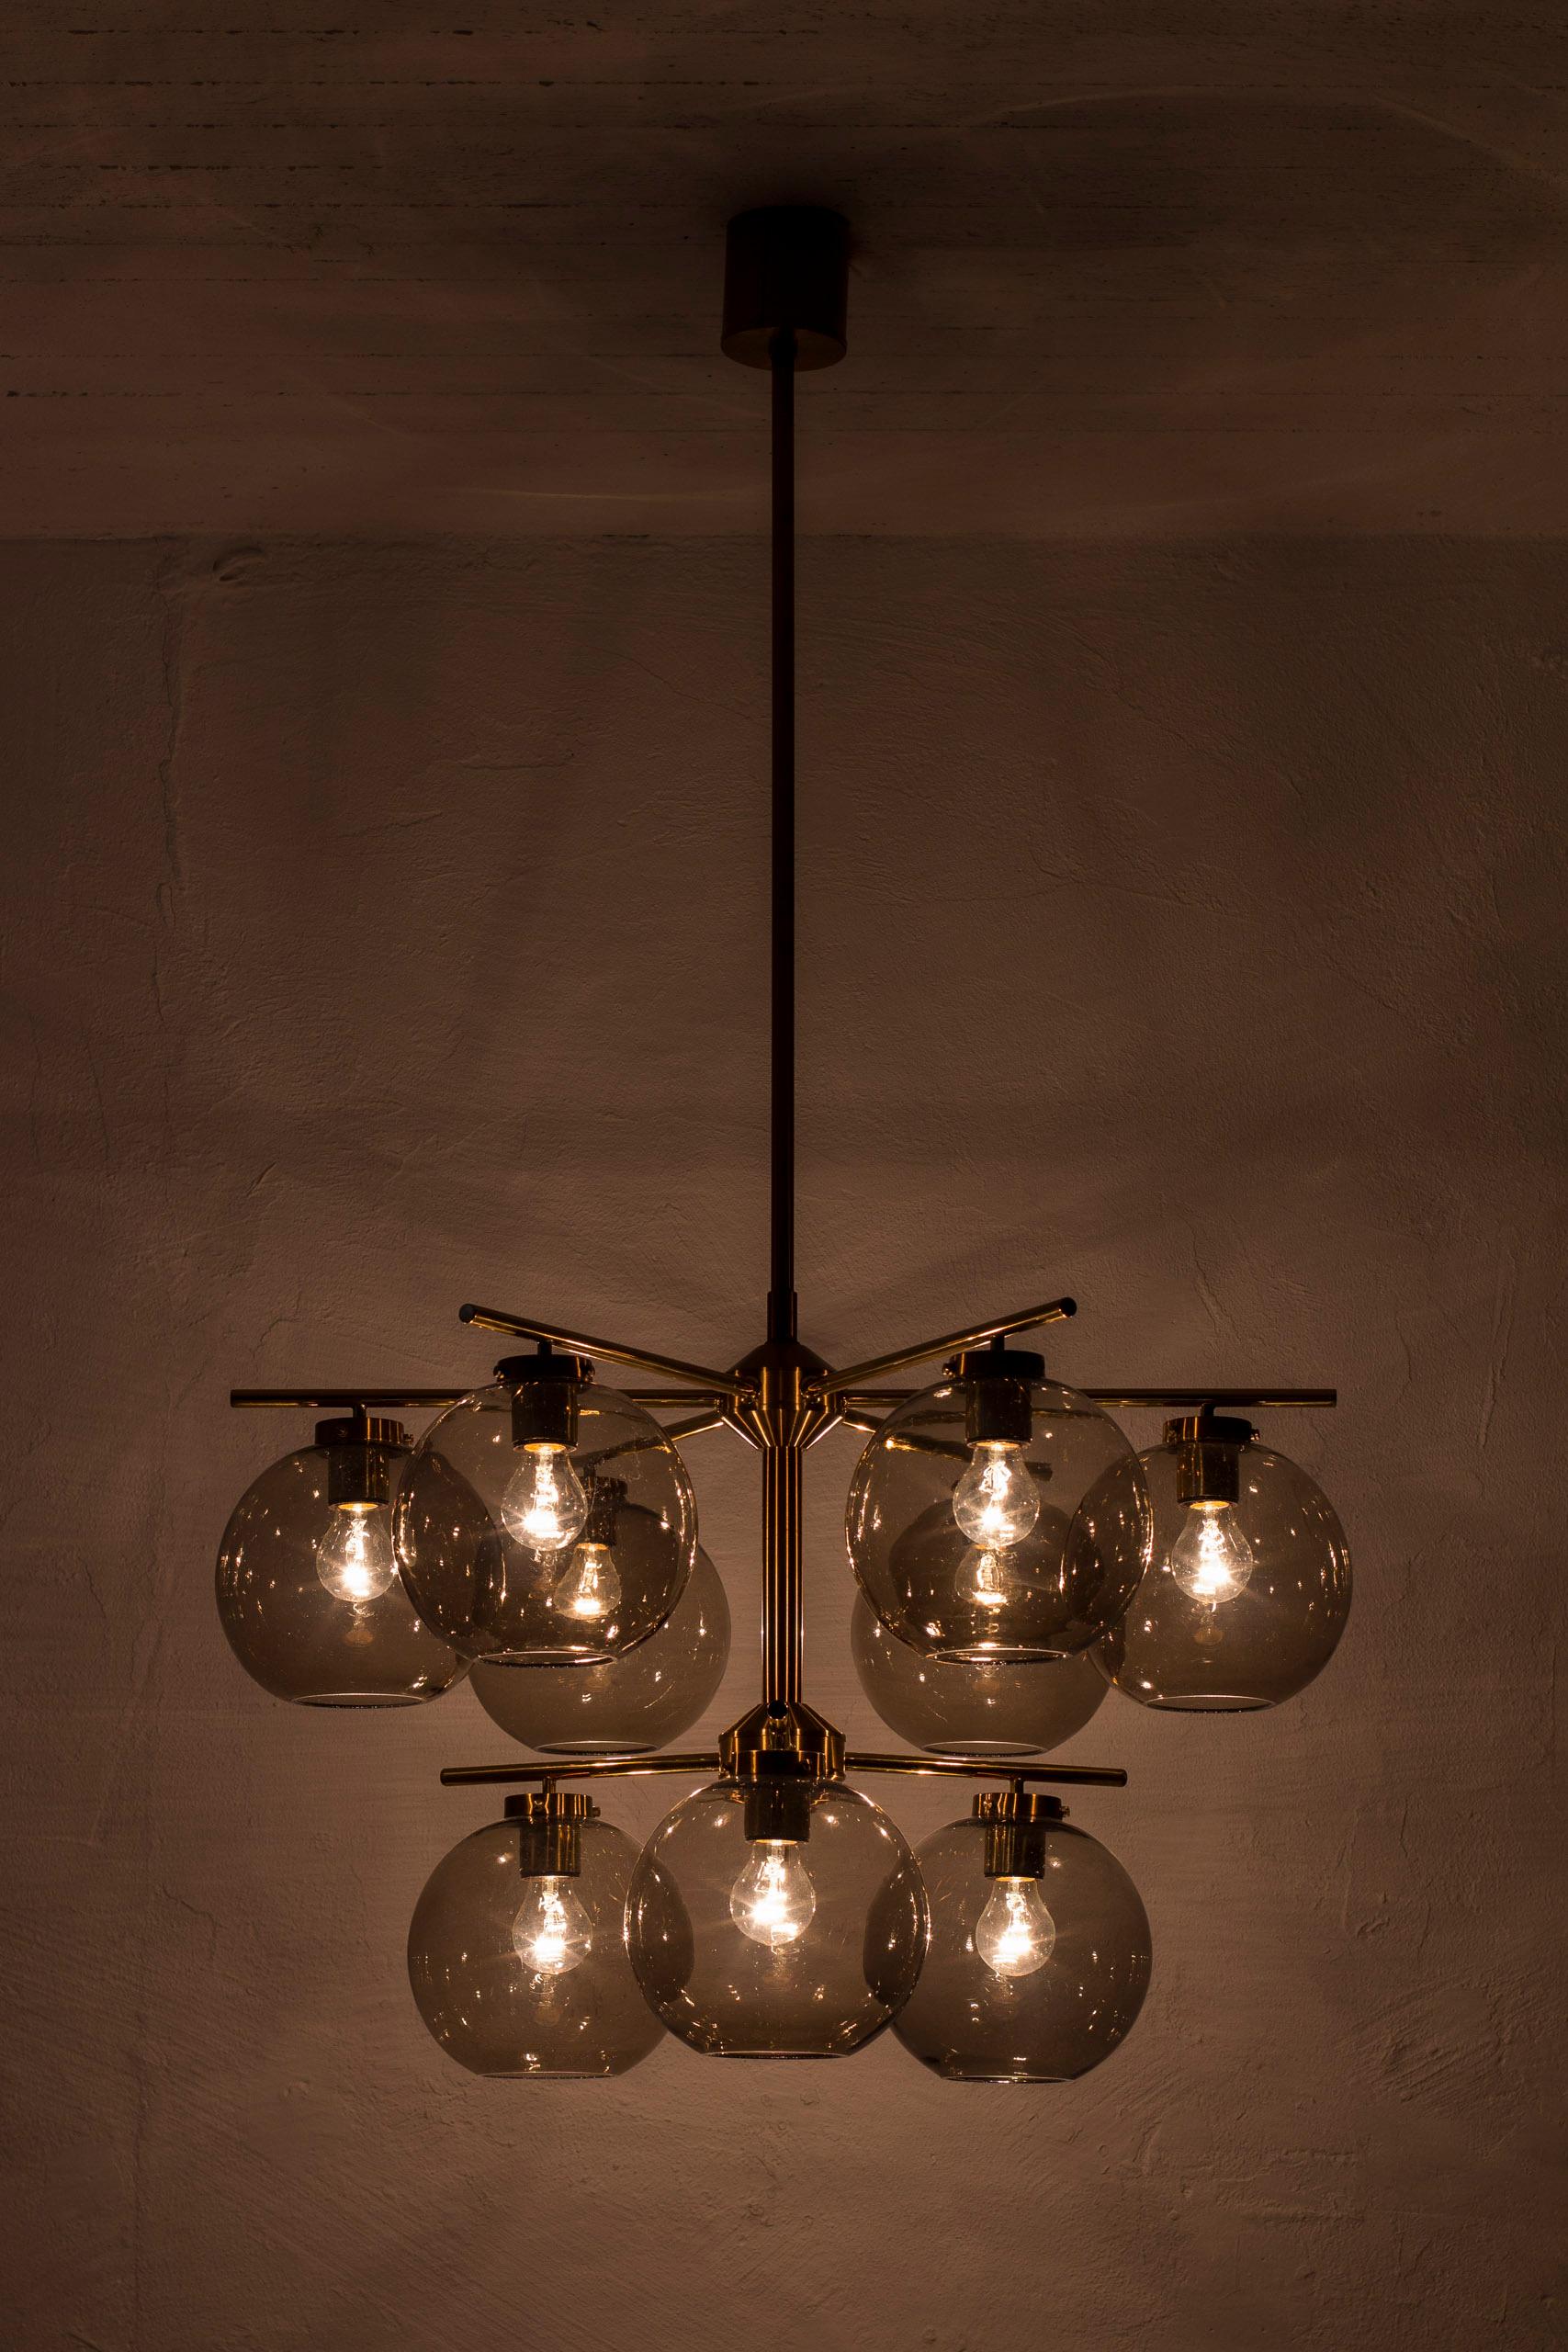 Mid-20th Century Brass and smoked glass chandeliers by Holger Johansson, Sweden, 1960s